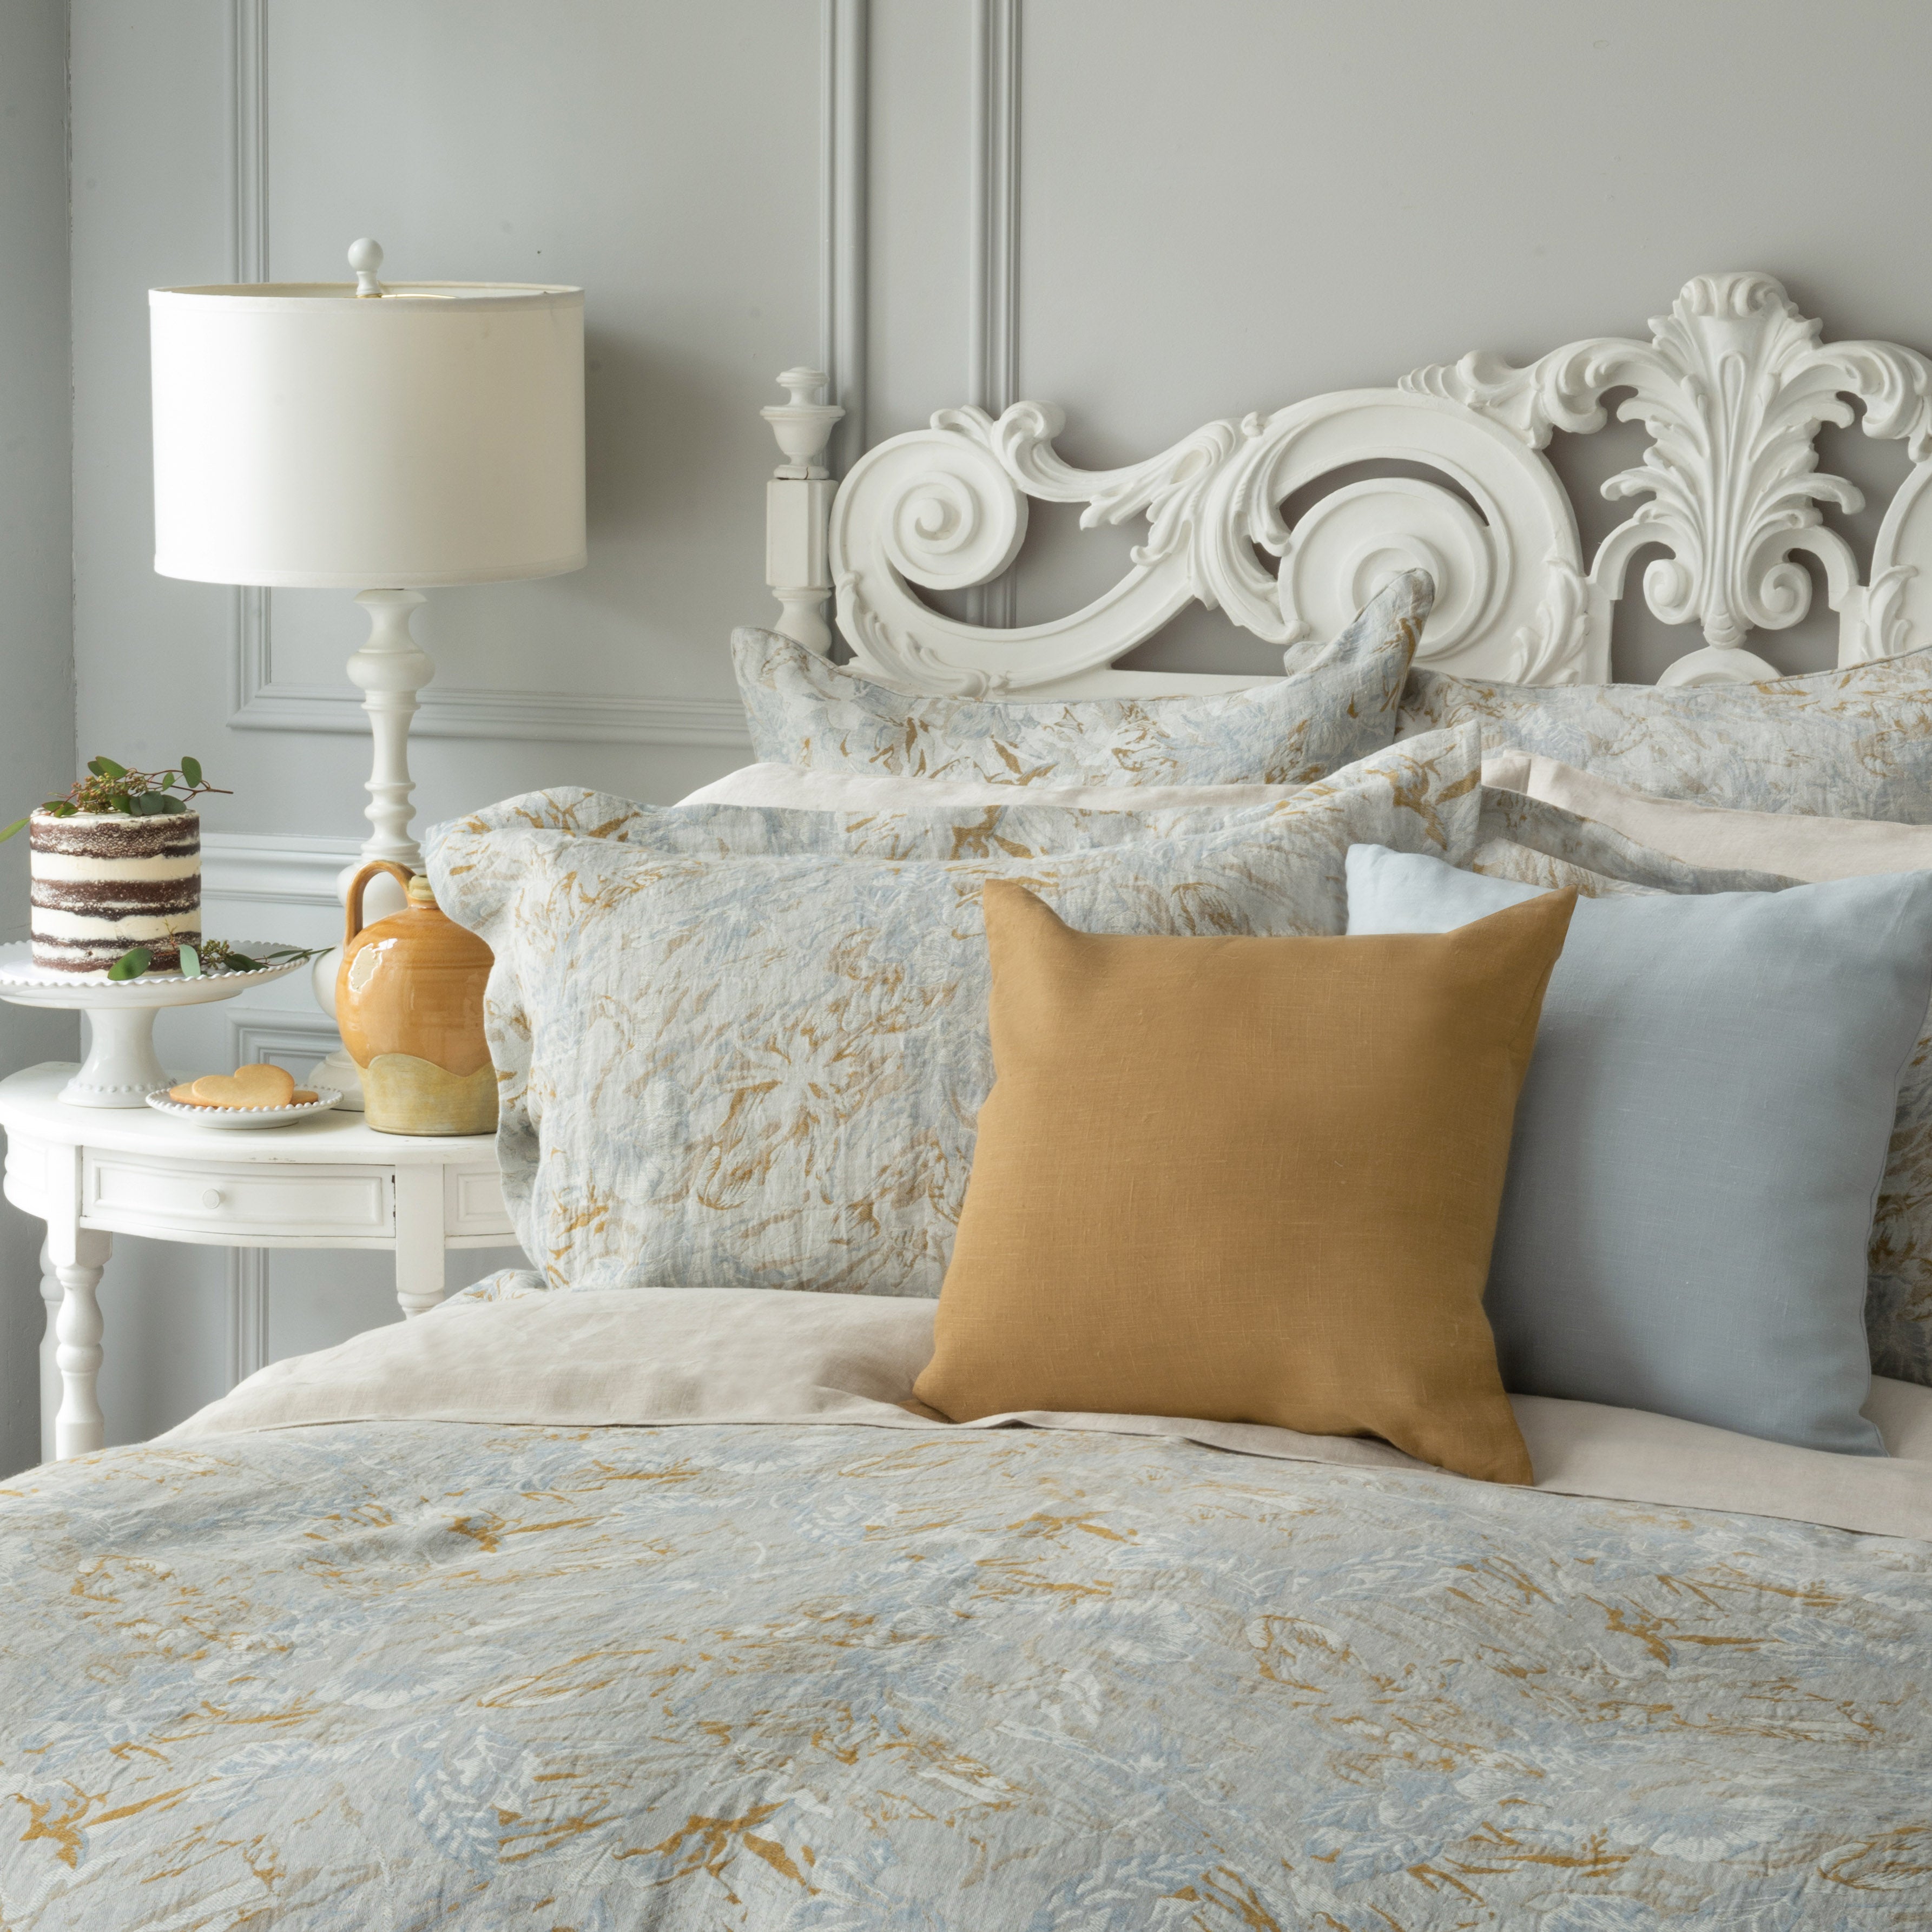 Primavera Linen Jacquard - Duvet Covers and Shams coordinating with Linho Cushions and Niicola sheets